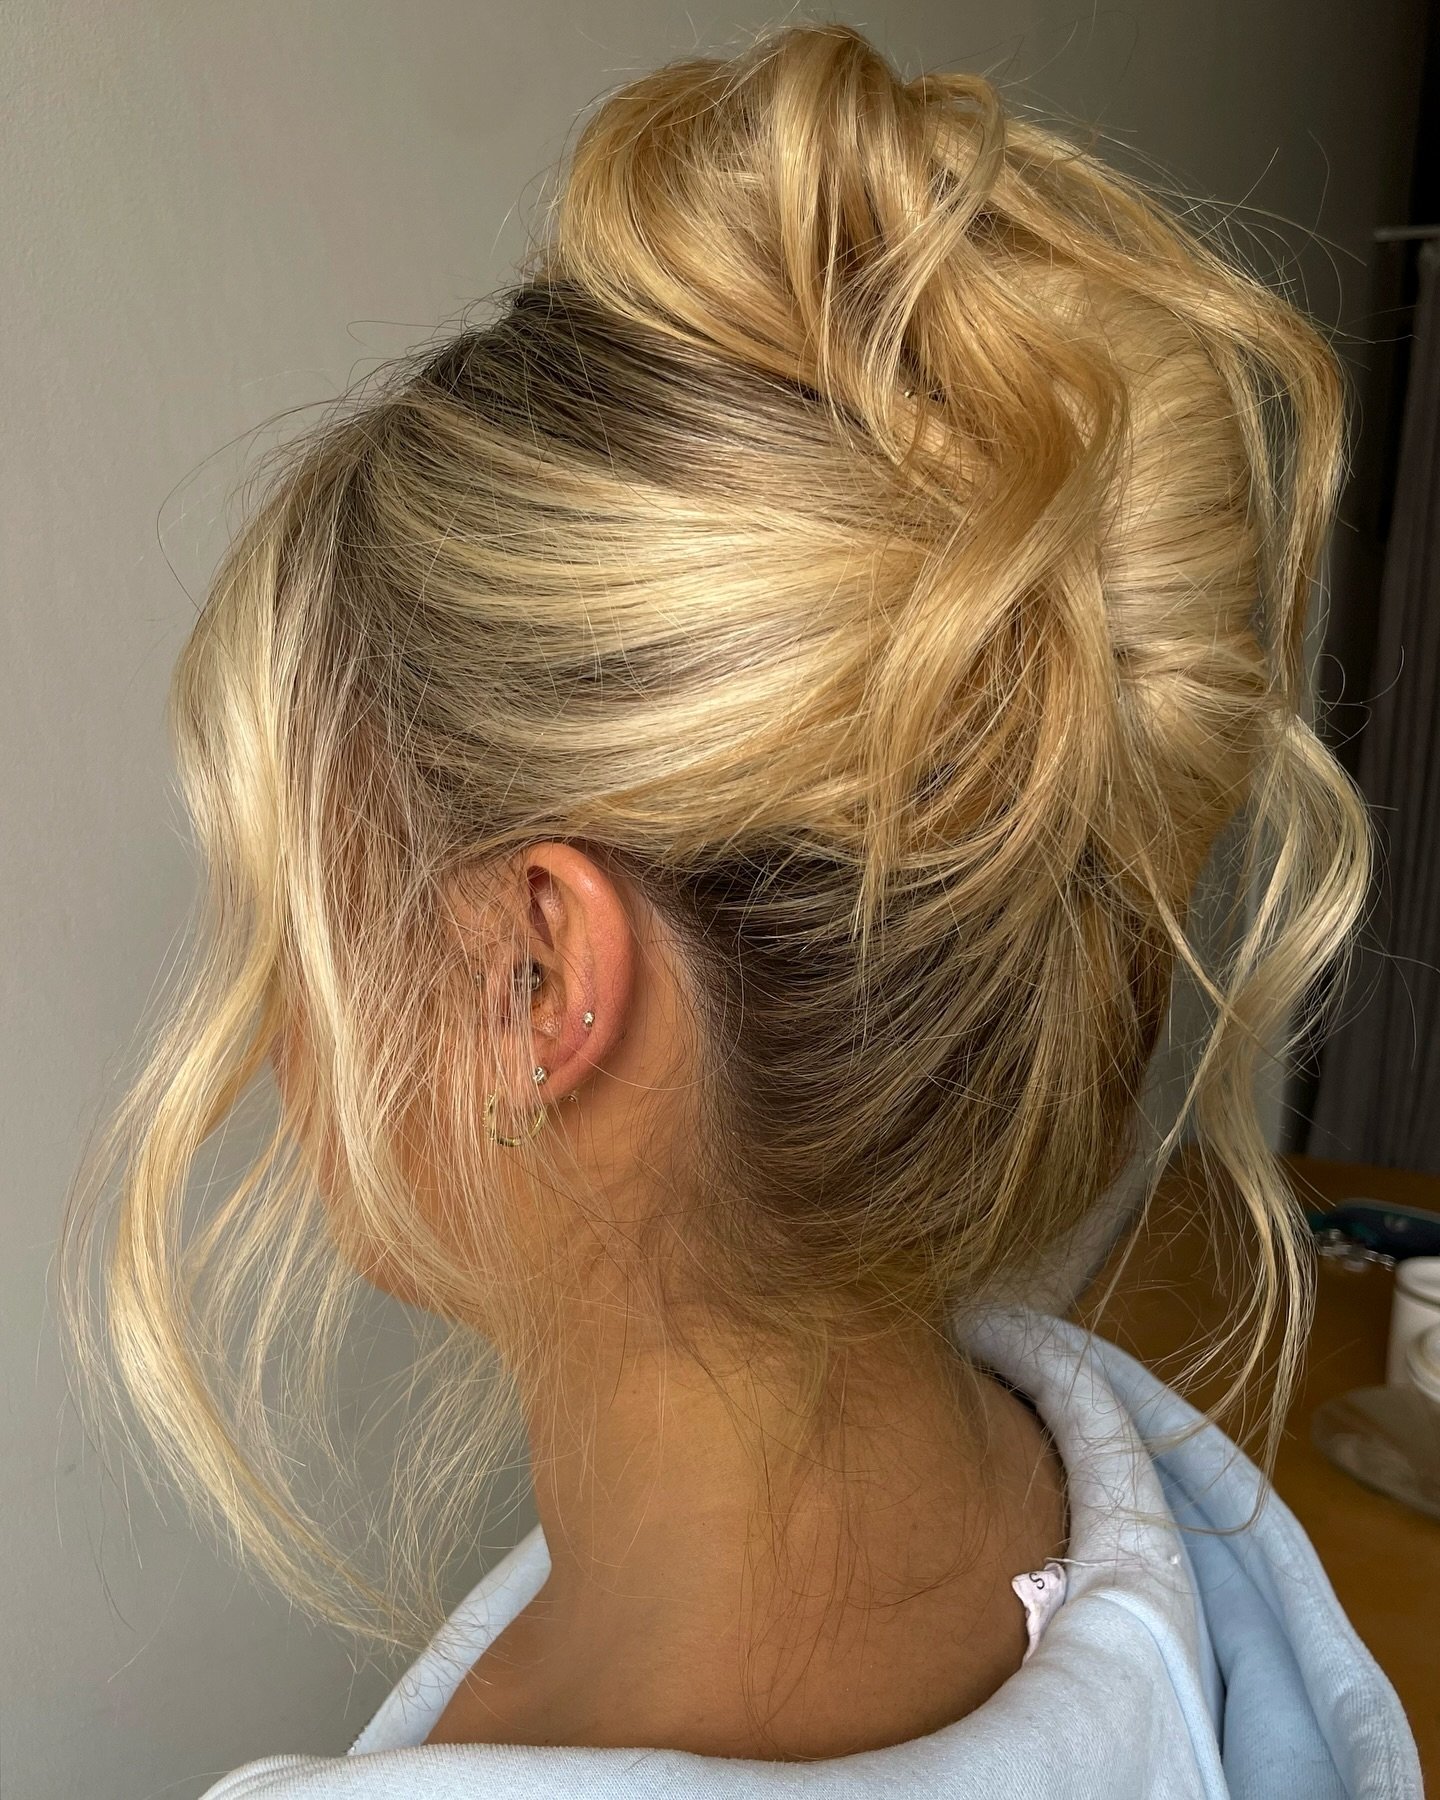 Thank you Pammy aka @pamelaanderson for resurrecting this hairstyle 🙌🏻
Todays hair in my client celebrating her 21st 🤍

Using :
Hair prep - @oribe Tres Set Structure Spray, Flash Form Finishing Spray Wax &amp;
 Swept Up Volume Powder Spray

Tools 